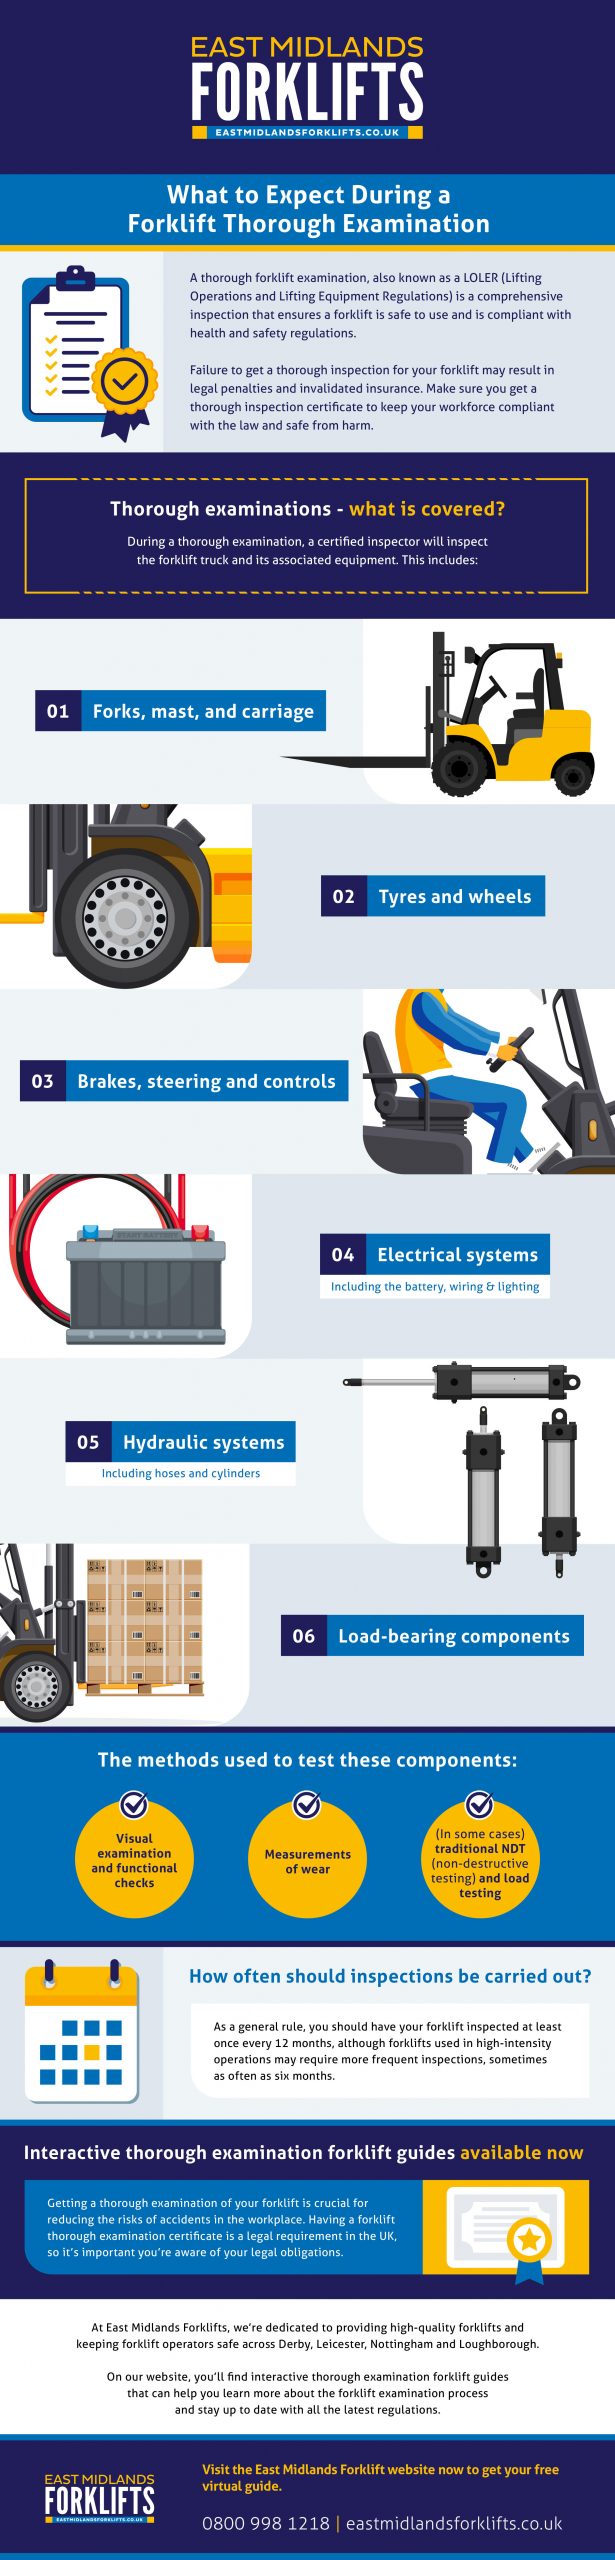 What to expect during a forklift thorough examination